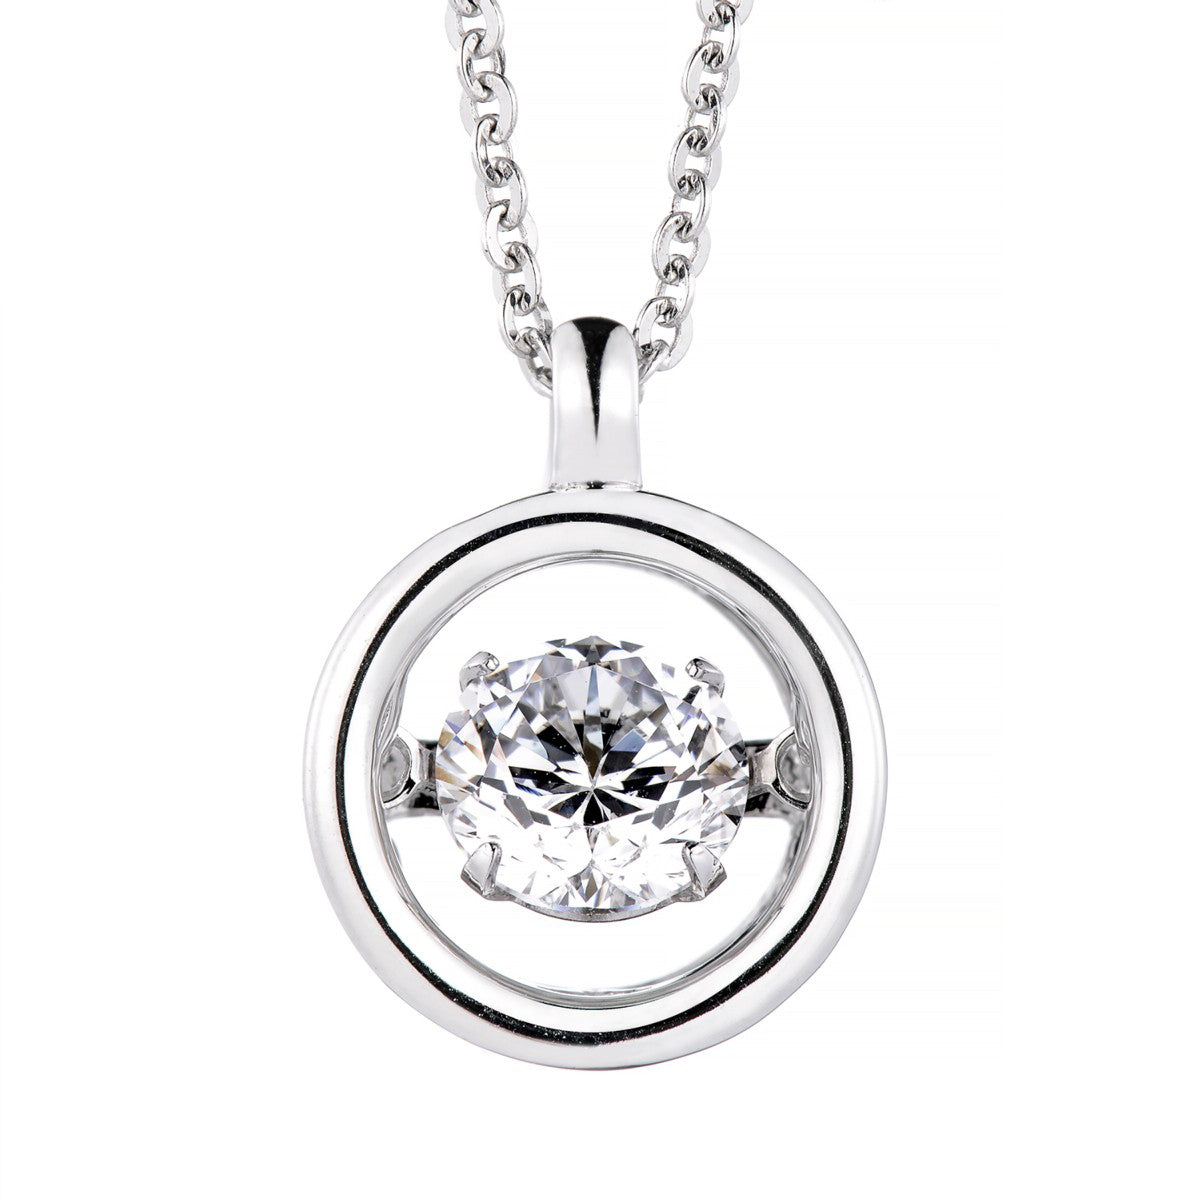 Fashionable and versatile 925 sterling silver smart necklace